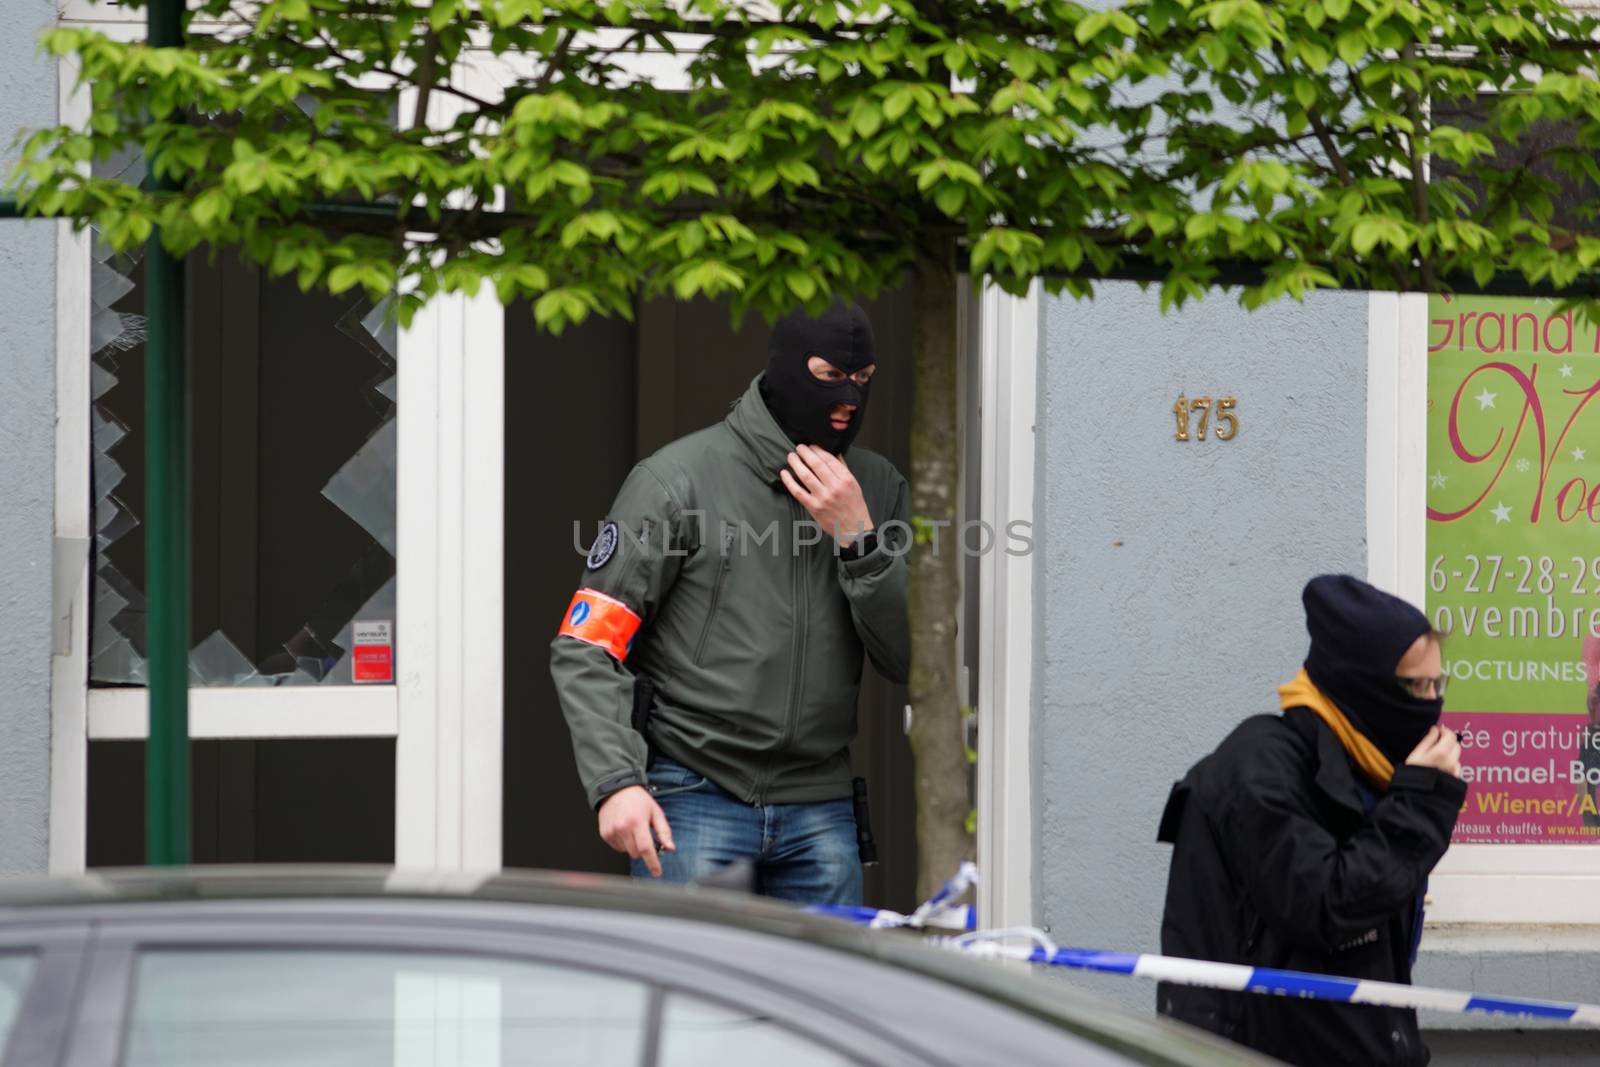 BELGIUM, Brussels: Belgian police search a house located in Uccle, a Brussels' municipality, on April 12, 2016. Three people have been arrested during this new raid linked to the investigation into the November Paris attacks, federal prosecutors said.